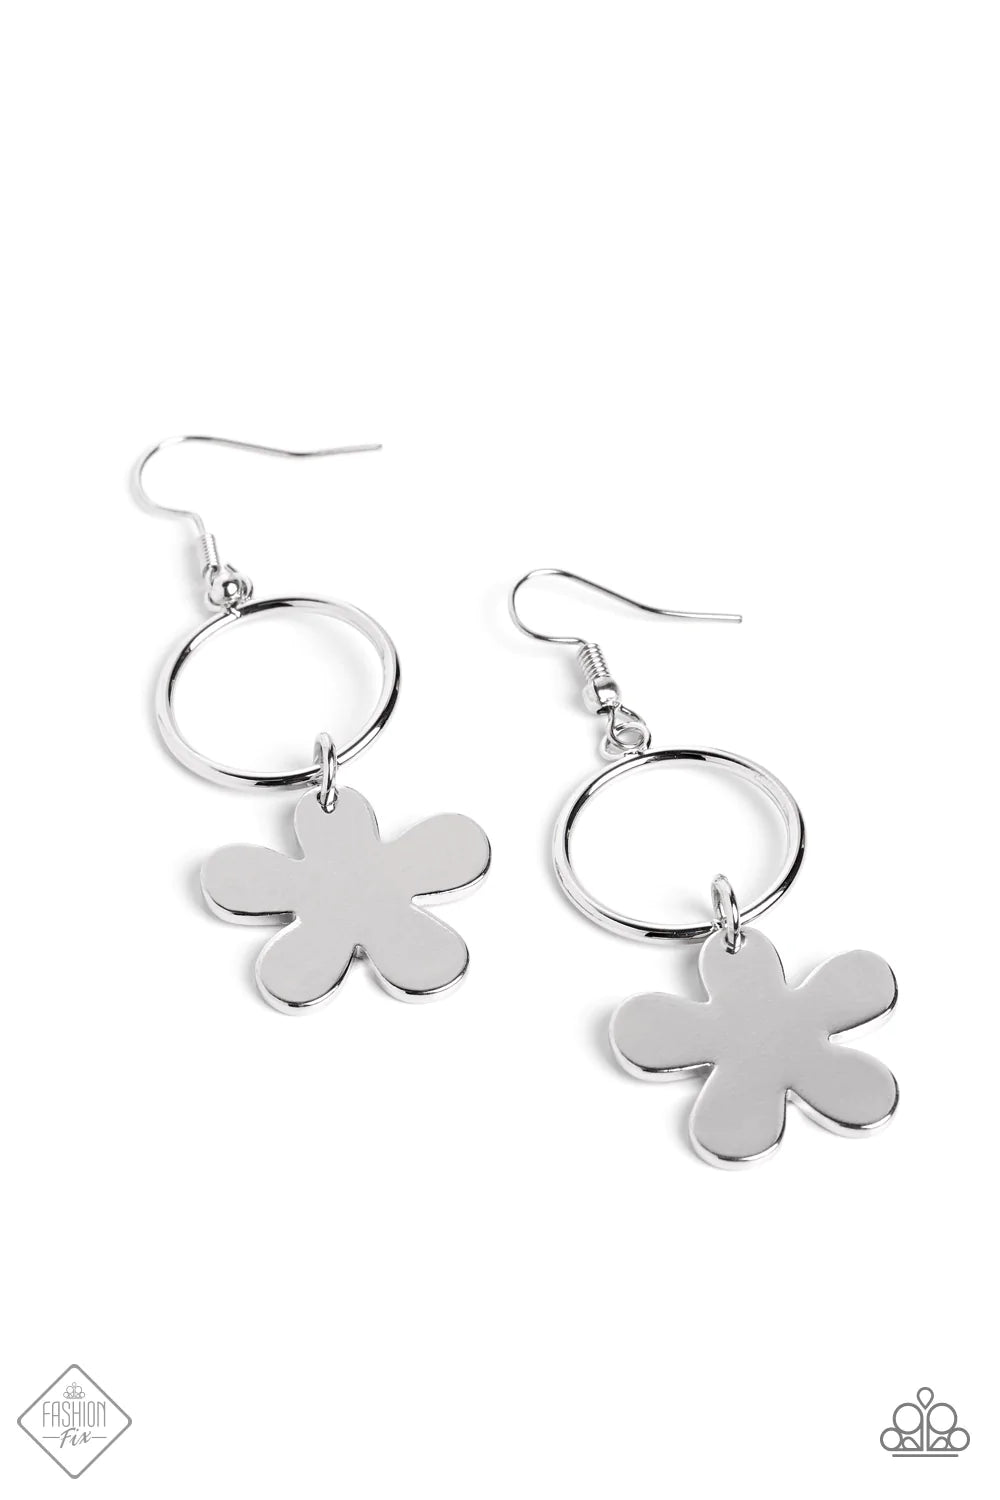 Foreshore Figurine - Silver Flower Earrings - Paparazzi Accessories - A psychedelic flower with a high-sheen silver finish swings freely from a classic silver hoop, creating a playful lure. Earring attaches to a standard fishhook fitting. Sold as one pair of earrings.